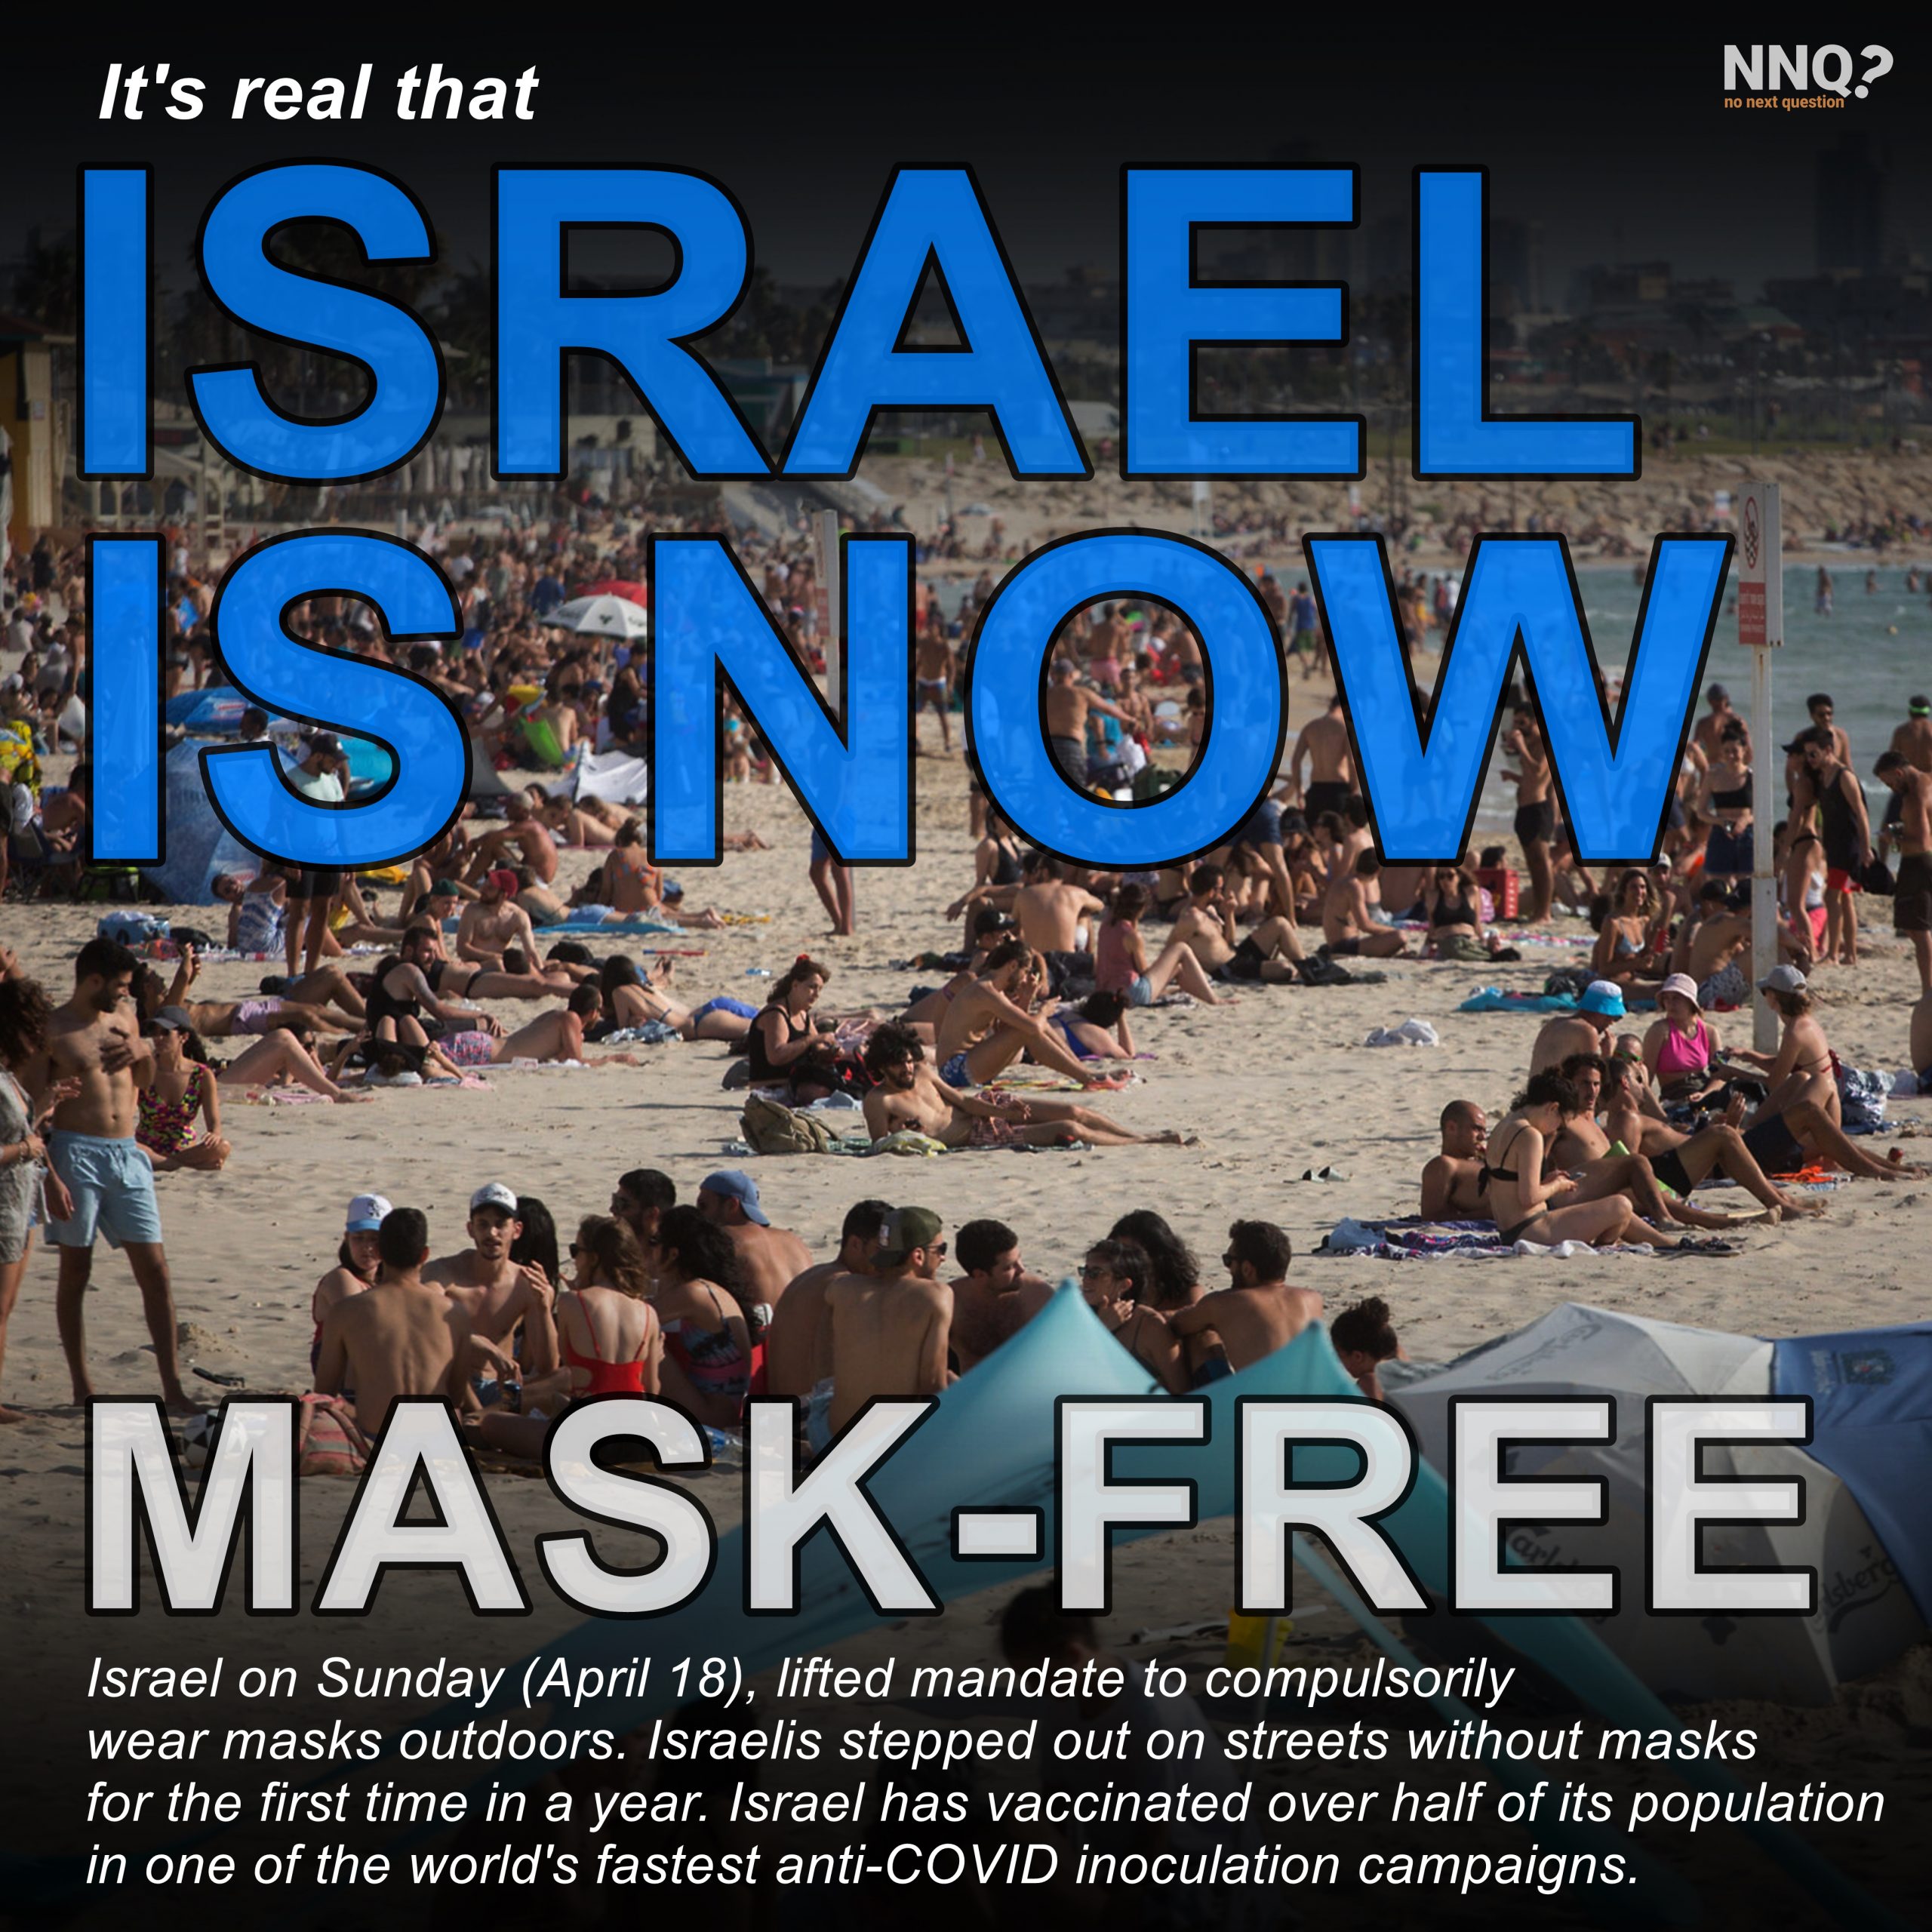 Israel is now MASK FREE